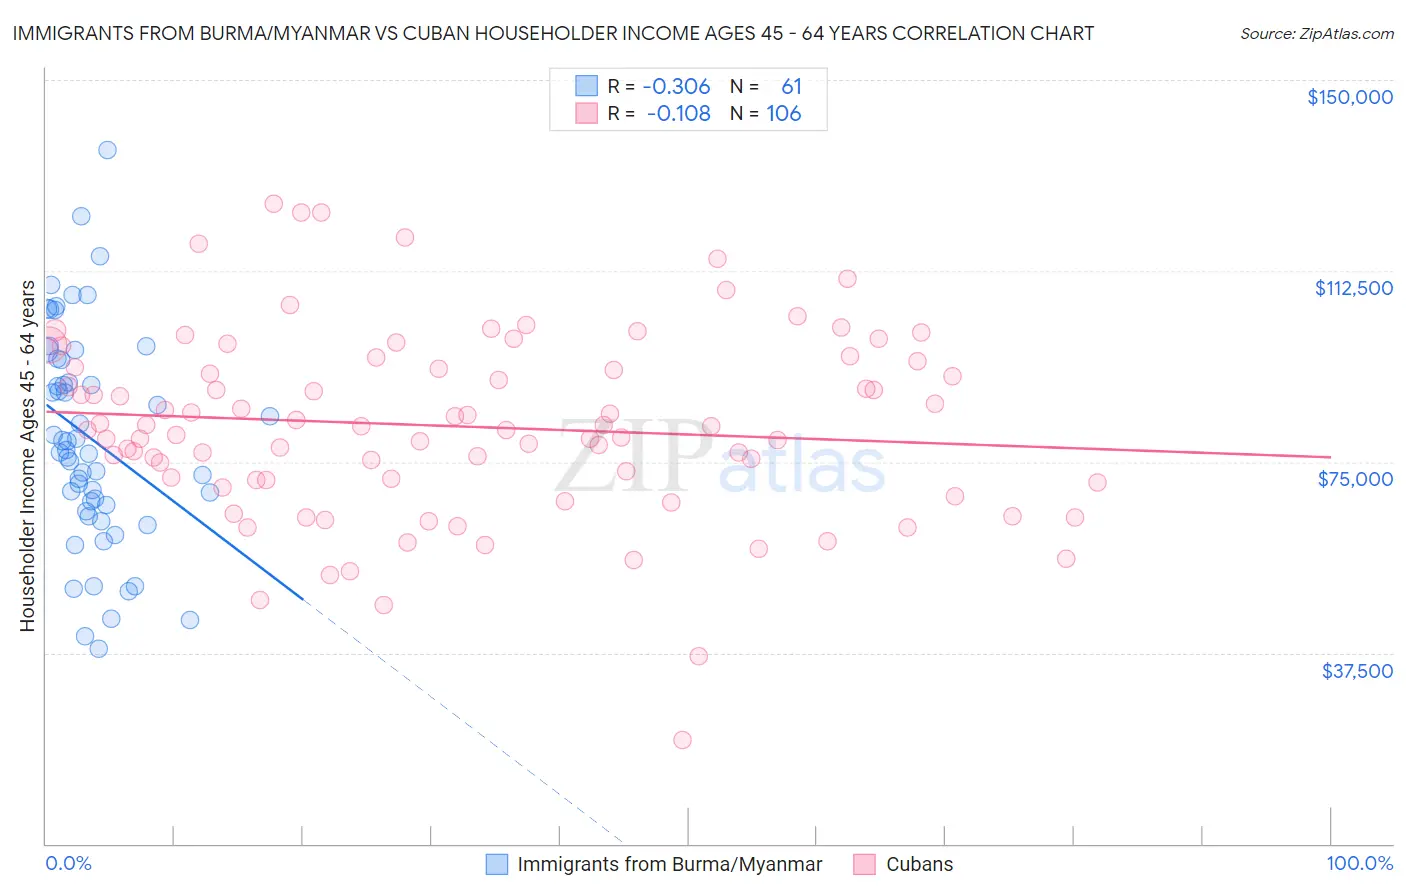 Immigrants from Burma/Myanmar vs Cuban Householder Income Ages 45 - 64 years